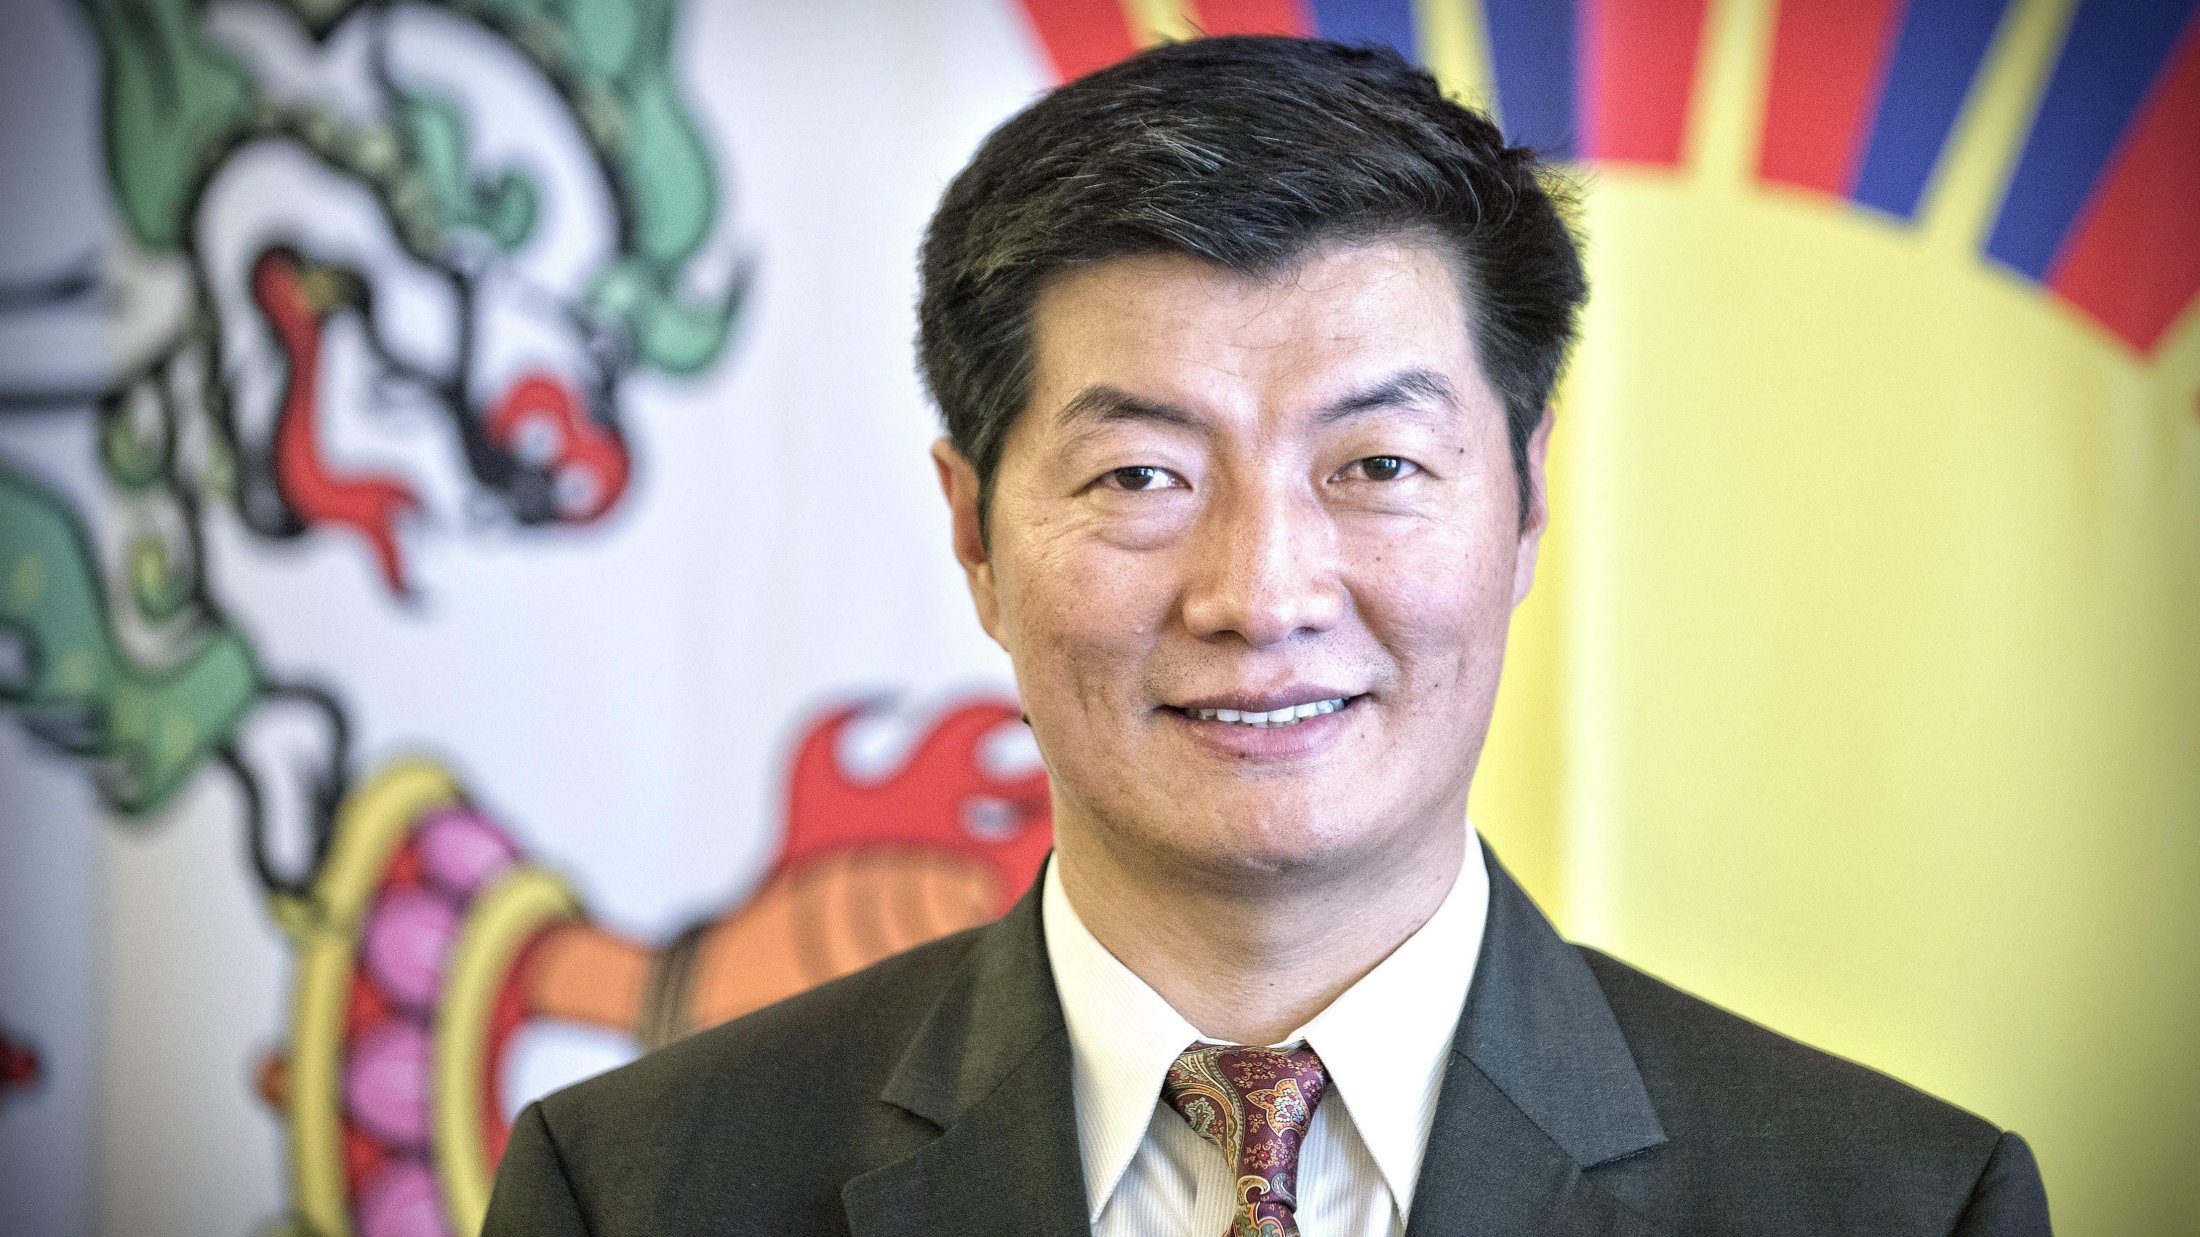 Lobsang Sangay is set to serve a second term as the Sikyong of the Central Tibetan Administration at Dharamshala, India.